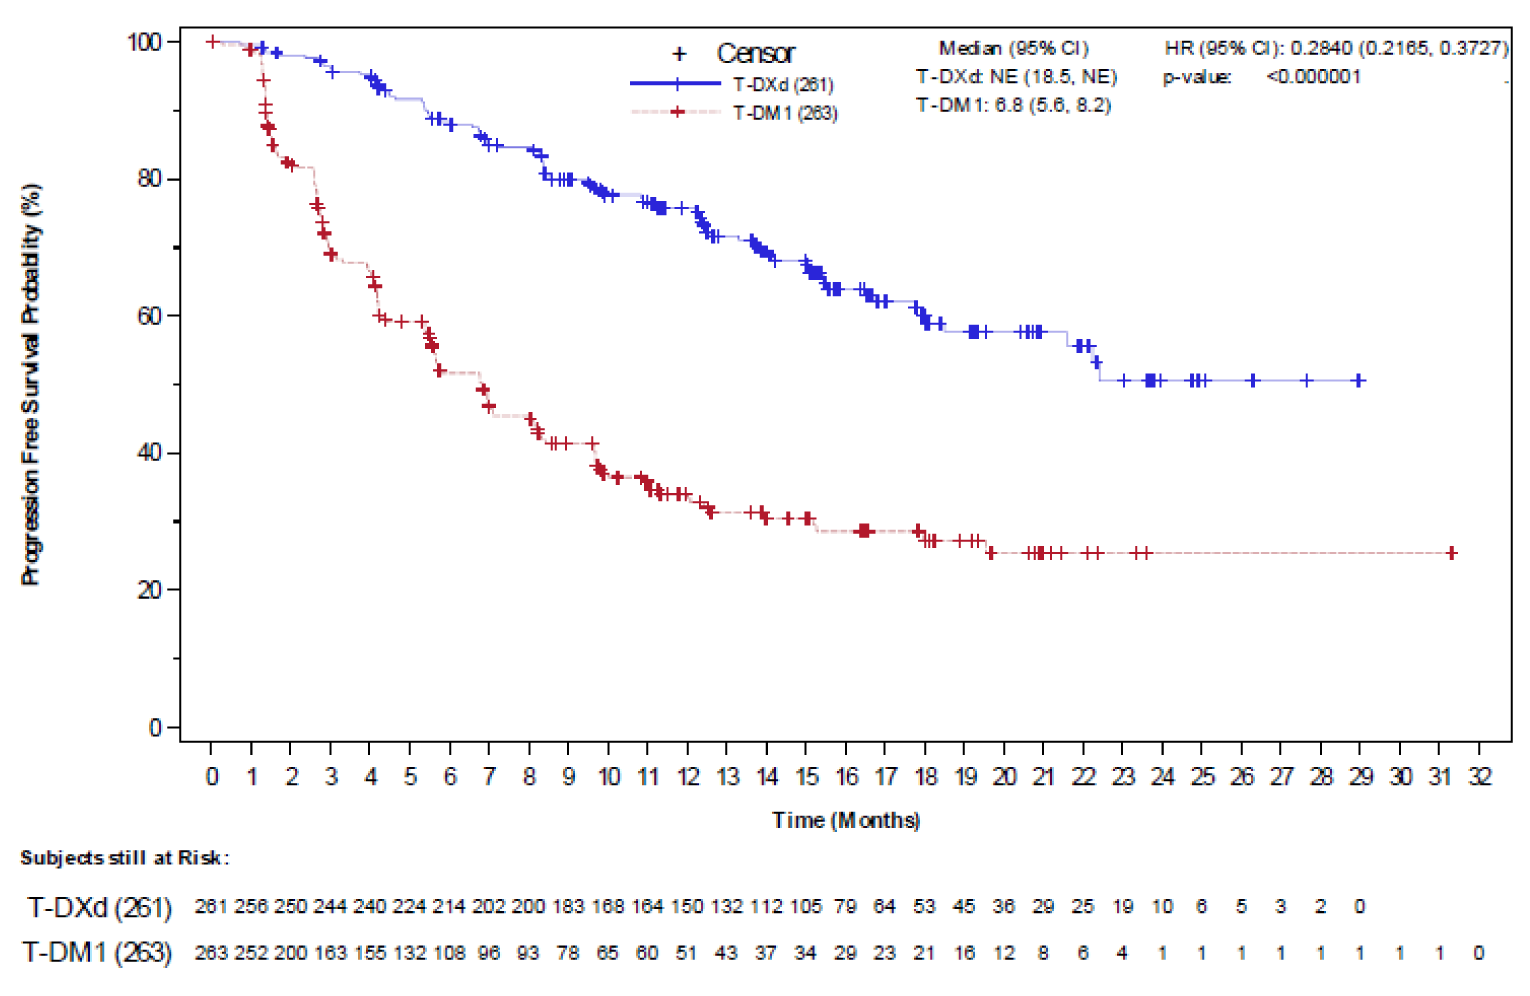 In this Kaplan-Meier analysis of PFS per BICR among patients in the DESTINY-Breast03 study, approximately 50% of patients receiving trastuzumab emtansine had progressed or died by 6 months, approximately 65% had progressed or died by 12 months, and approximately 75% had progressed or died by 24 months. In contrast, approximately 10% of patients receiving T-DXd had progressed or died by 6 months, approximately 25% had progressed or died by 12 months, and approximately 50% had progressed or died by 24 months. Median PFS was not estimable (95% CI, 18.5 months to not estimable) in the T-DXd arm and 6.8 months (95% CI, 5.6 months to 8.2 months) in the trastuzumab emtansine arm; the HR comparing T-DXd to trastuzumab emtansine was 0.2840 ((95% CI, 0.2165 to 0.3727; P < 0.0001). The number of at-risk patients receiving T-DXd at 0, 1, 2, 3, 4, 5, 6, 7, 8, 9, 10, 11, 12, 13, 14, 15, 16, 17, 18, 19, 20, 21, 22, 23, 24, 25, 26, 27, 28, and 29 months was 261, 256, 250, 244, 240, 224, 214, 202, 200, 183, 168, 164, 150, 132, 112, 105, 79, 64, 53, 45, 36, 29, 25, 19, 10, 6, 5, 3, 2, and 0, respectively. The number of at-risk patients receiving trastuzumab emtansine at 0, 1, 2, 3, 4, 5, 6, 7, 8, 9, 10, 11, 12, 13, 14, 15, 16, 17, 18, 19, 20, 21, 22, 23, 24, 25, 26, 27, 28, 29 30, 31, and 32 months was 263, 252, 200, 163, 155, 132, 108, 96, 93, 78, 65, 60, 51, 43, 37, 34, 29, 23, 21, 16, 12, 8, 6, 4, 1, 1, 1, 1, 1, 1, 1, 1,and 0, respectively.